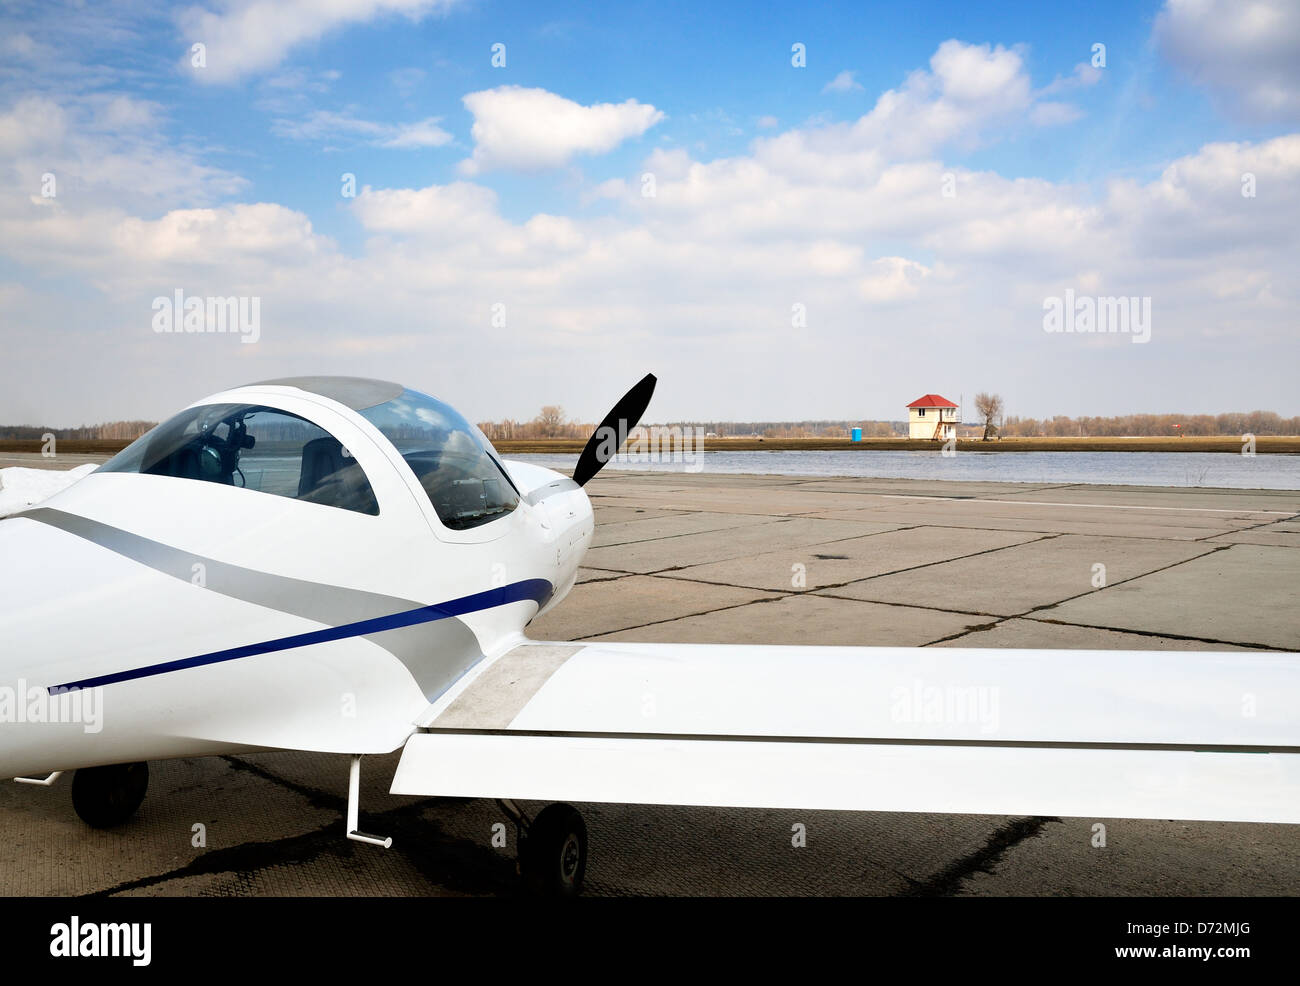 A modern light aircraft on the airfield Stock Photo